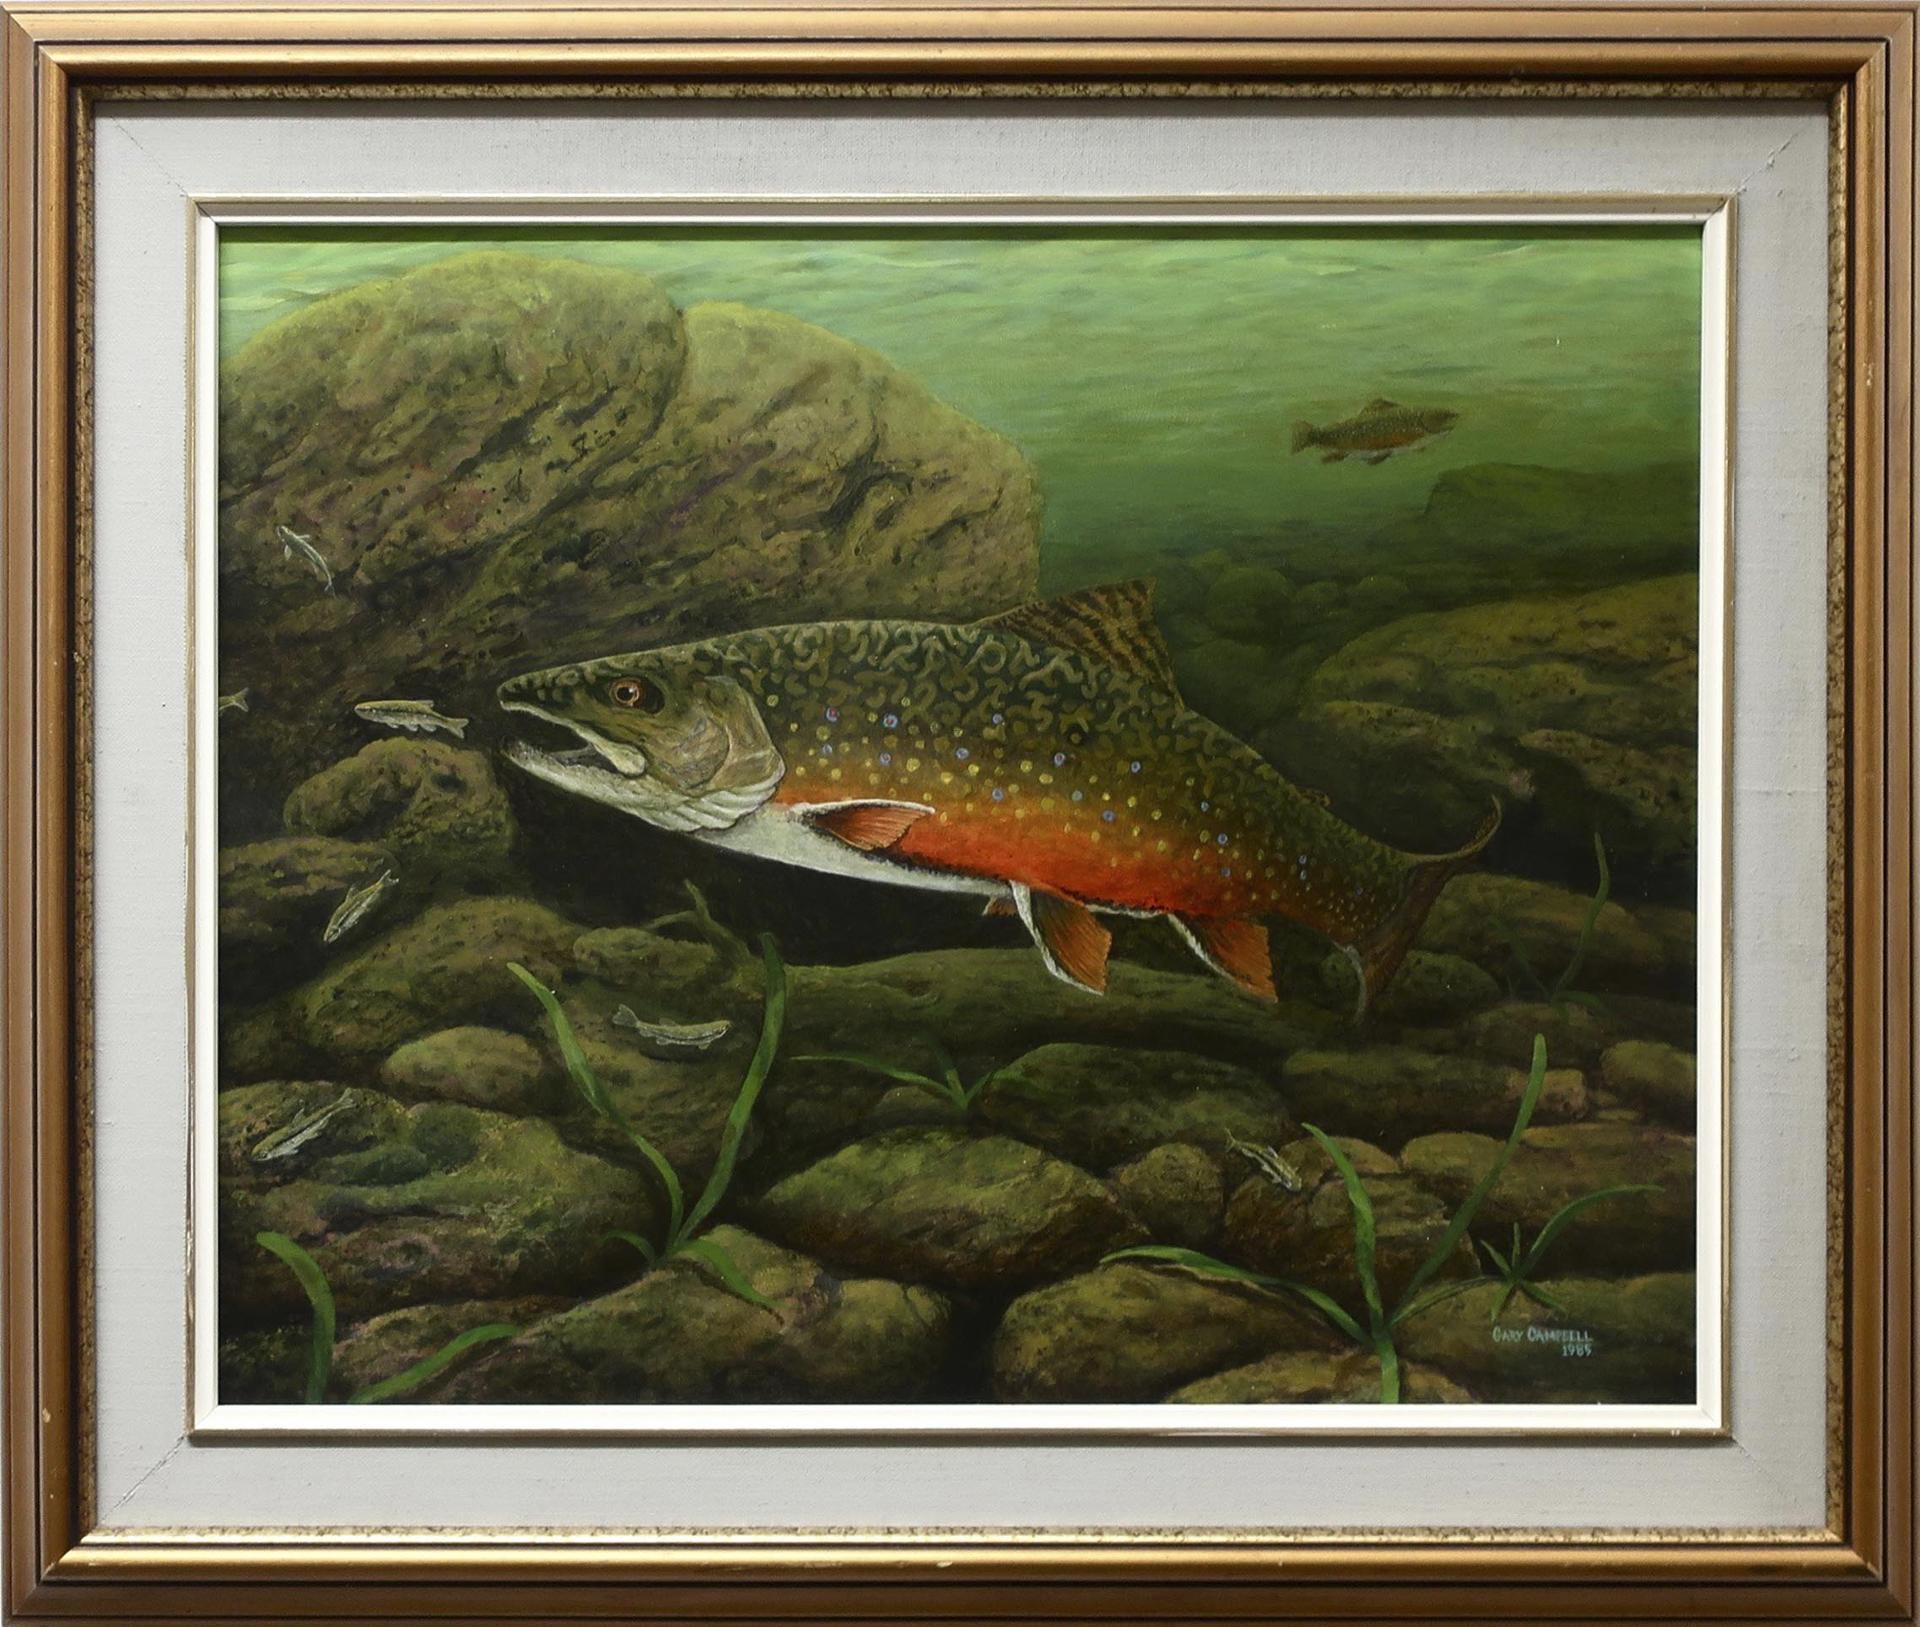 Gary Campbell - Untitled (Salmon Spawning)